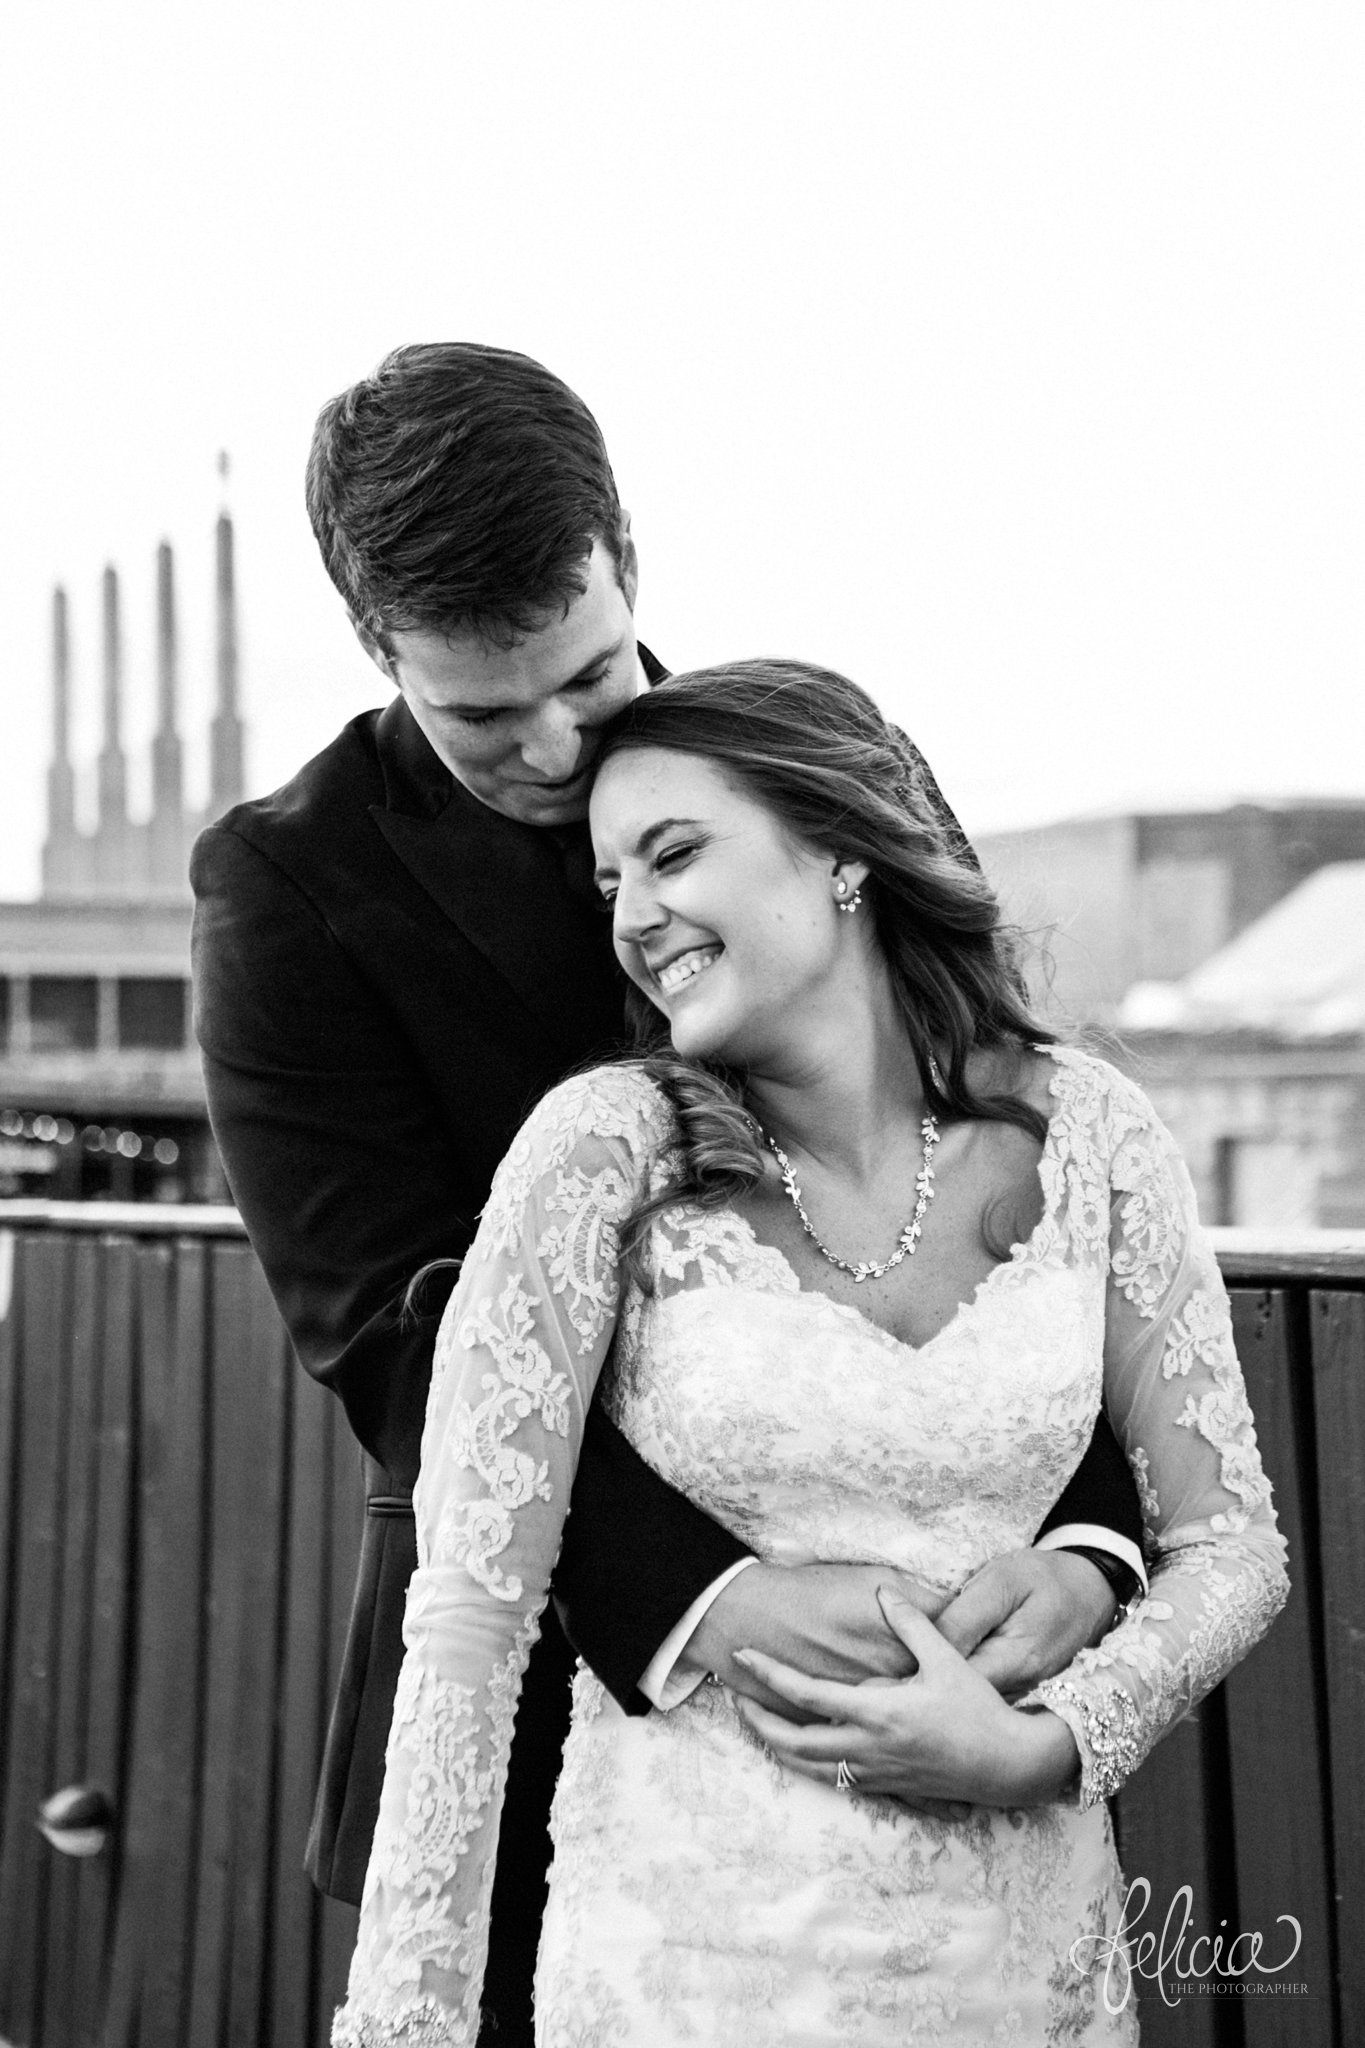 black and white | weddings | wedding photos | wedding photography | images by feliciathephotographer.com | St. Therese Catholic Church | Kansas City | downtown | The Terrace on Grand | bridal party portraits | urban jungle | downtown skyline | bride and groom portrait | rooftop photo | romantic pose | Kansas City Performing Arts Center | candid | laughing bride 